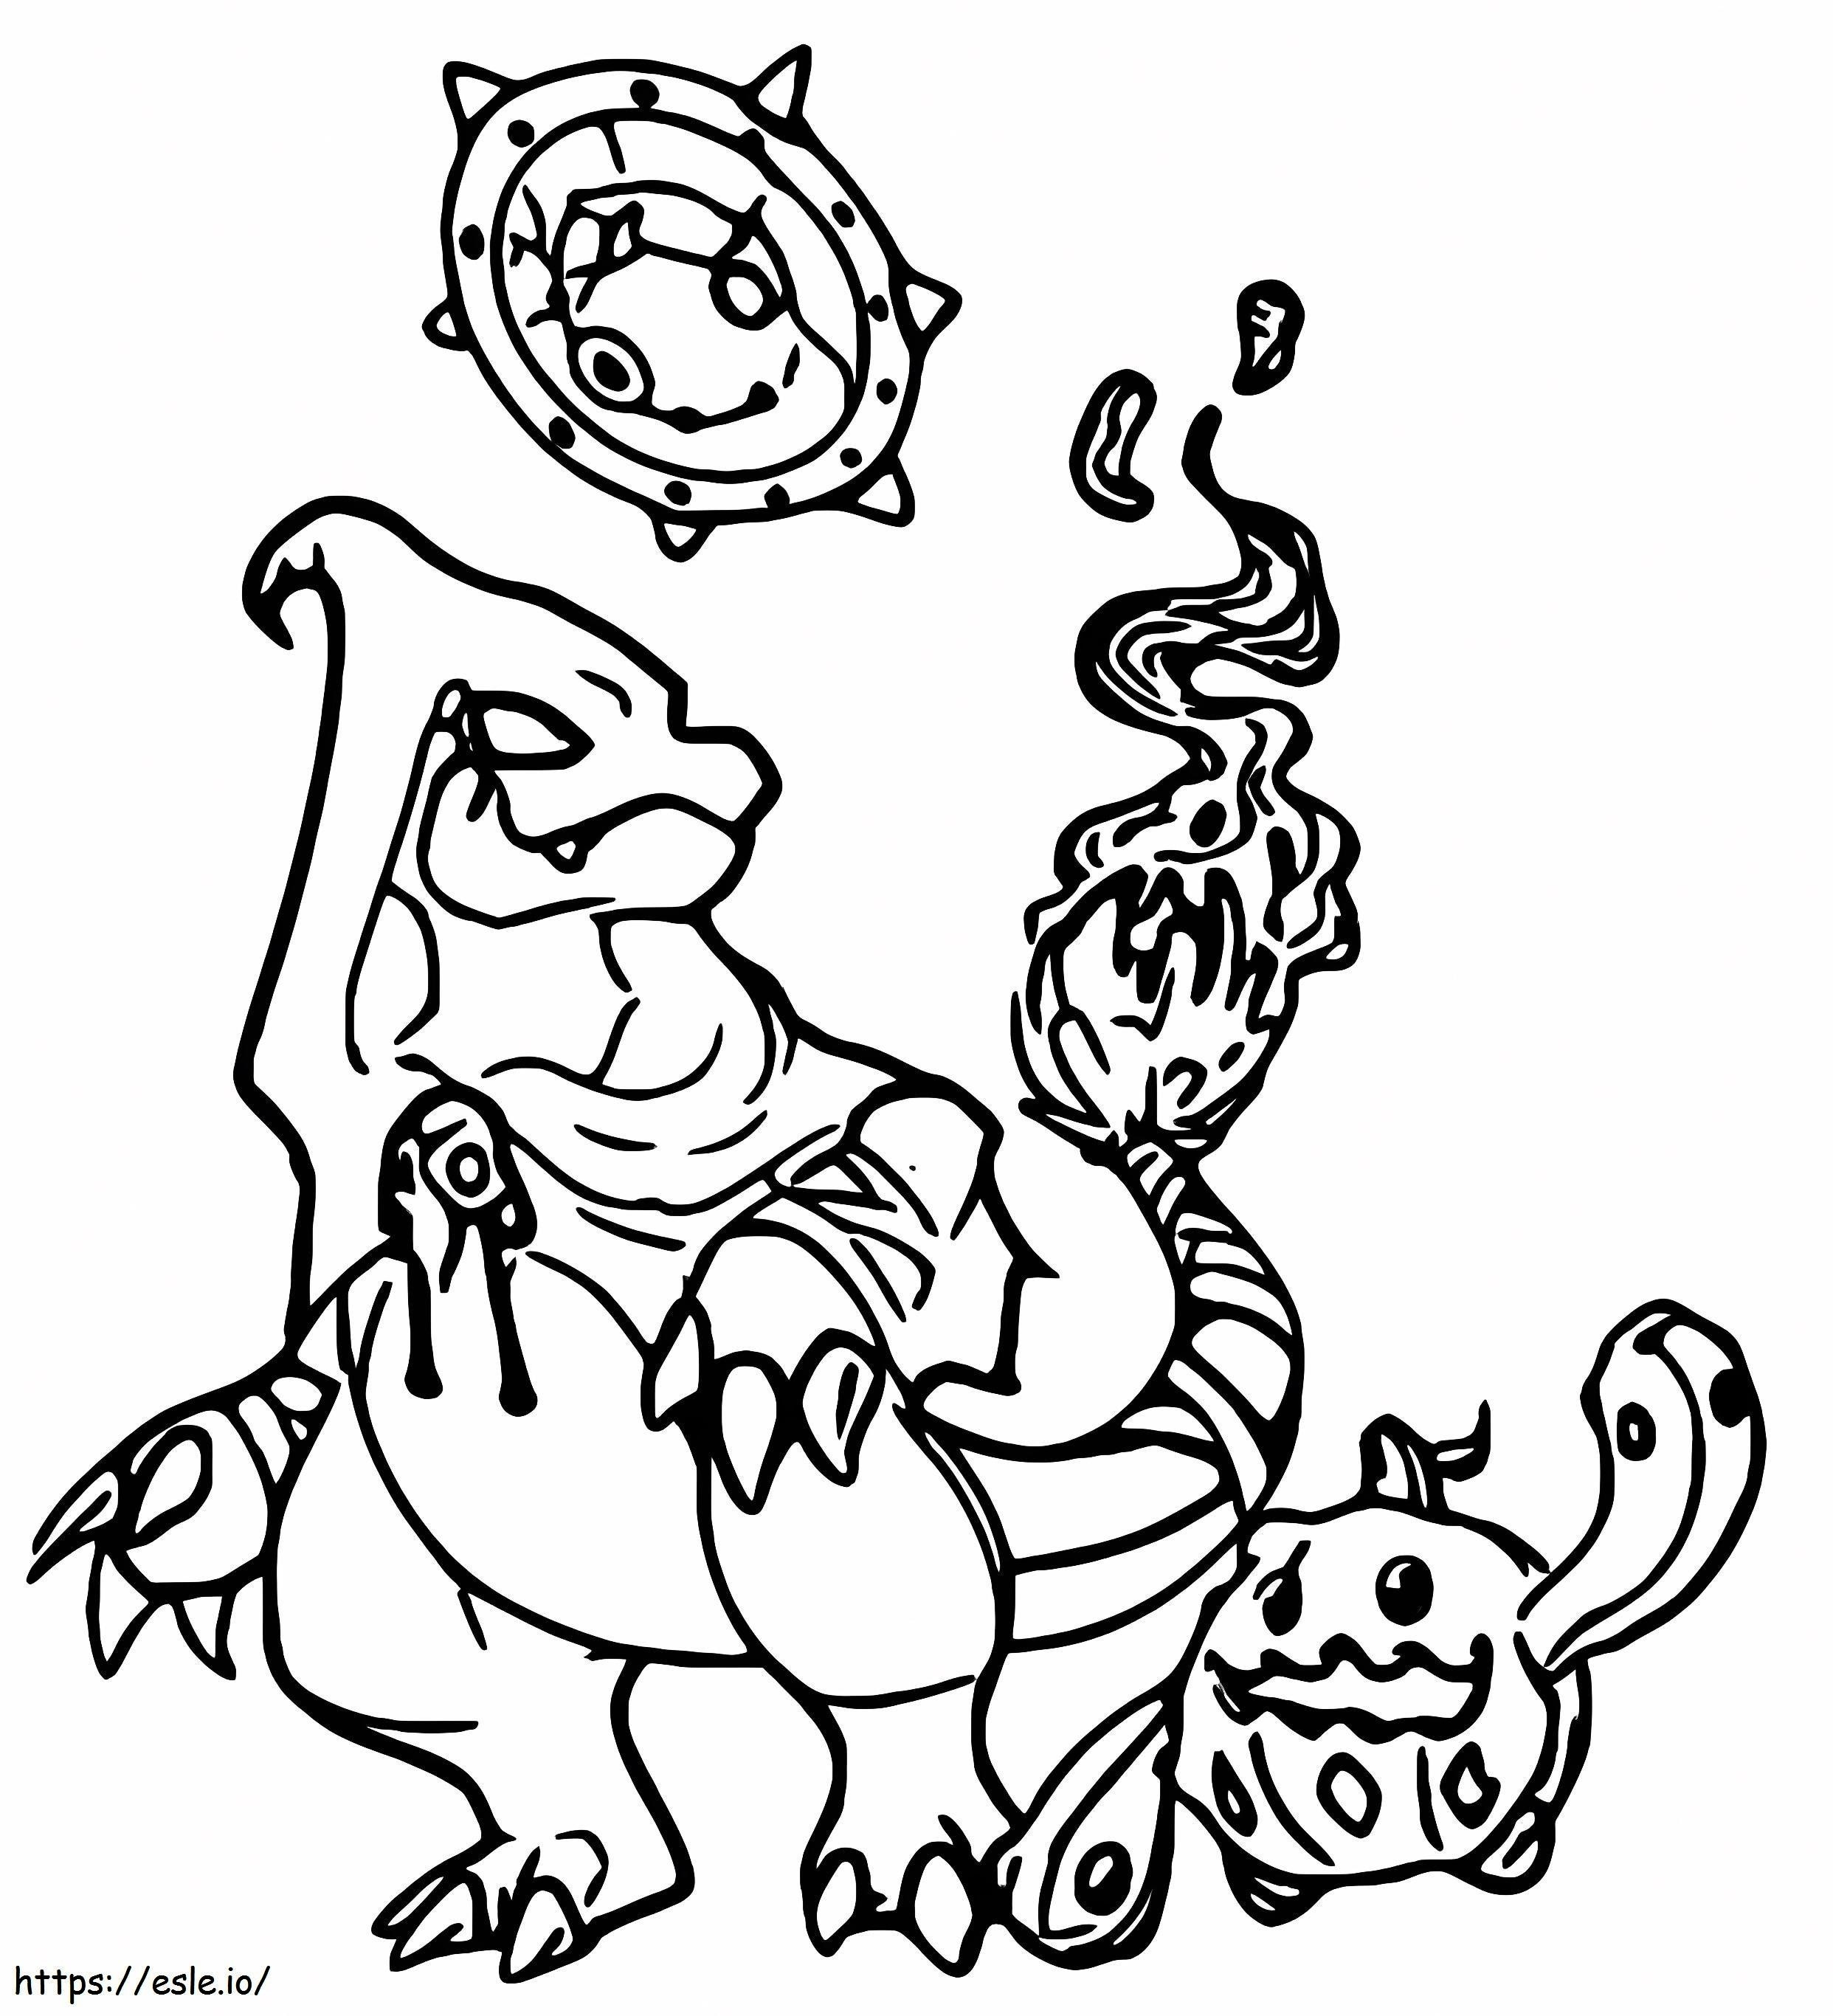 Halloween Charmeleon coloring page